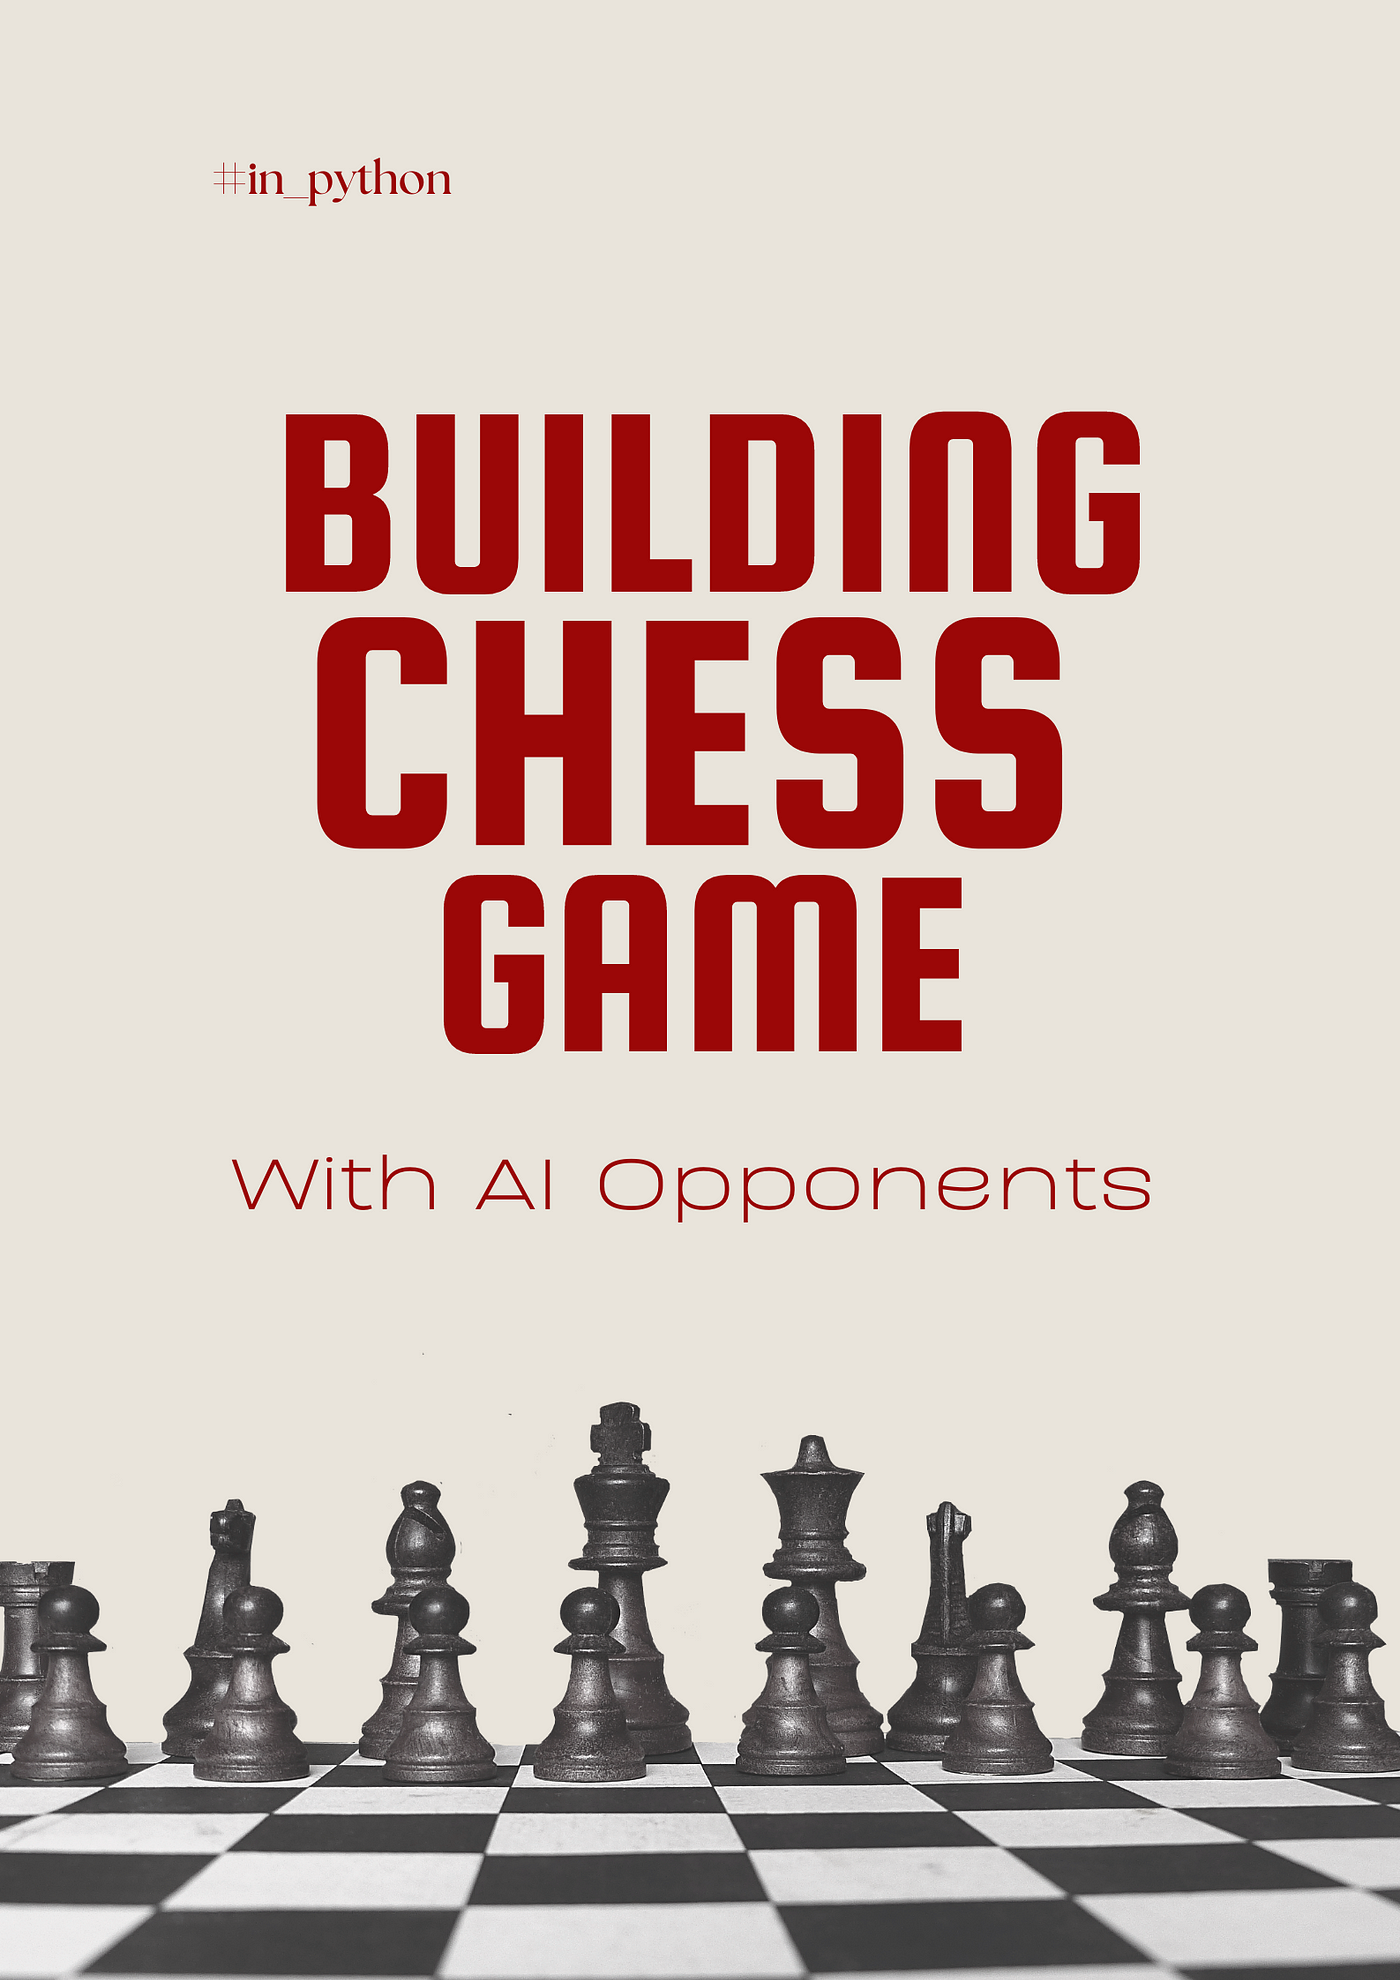 Game Analysis and Guide : r/chess